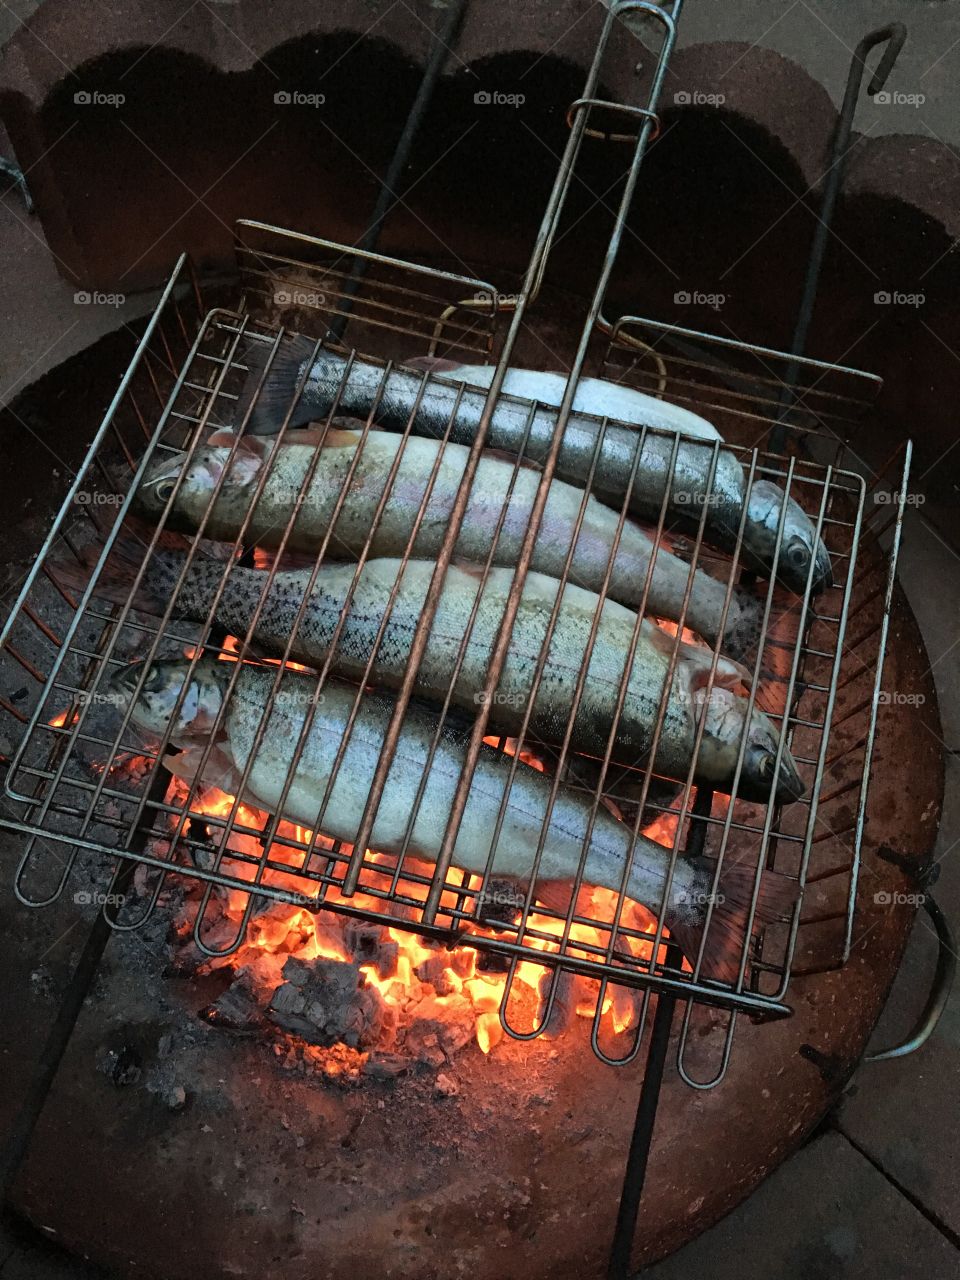 Rainbow trout cooked over an open fire